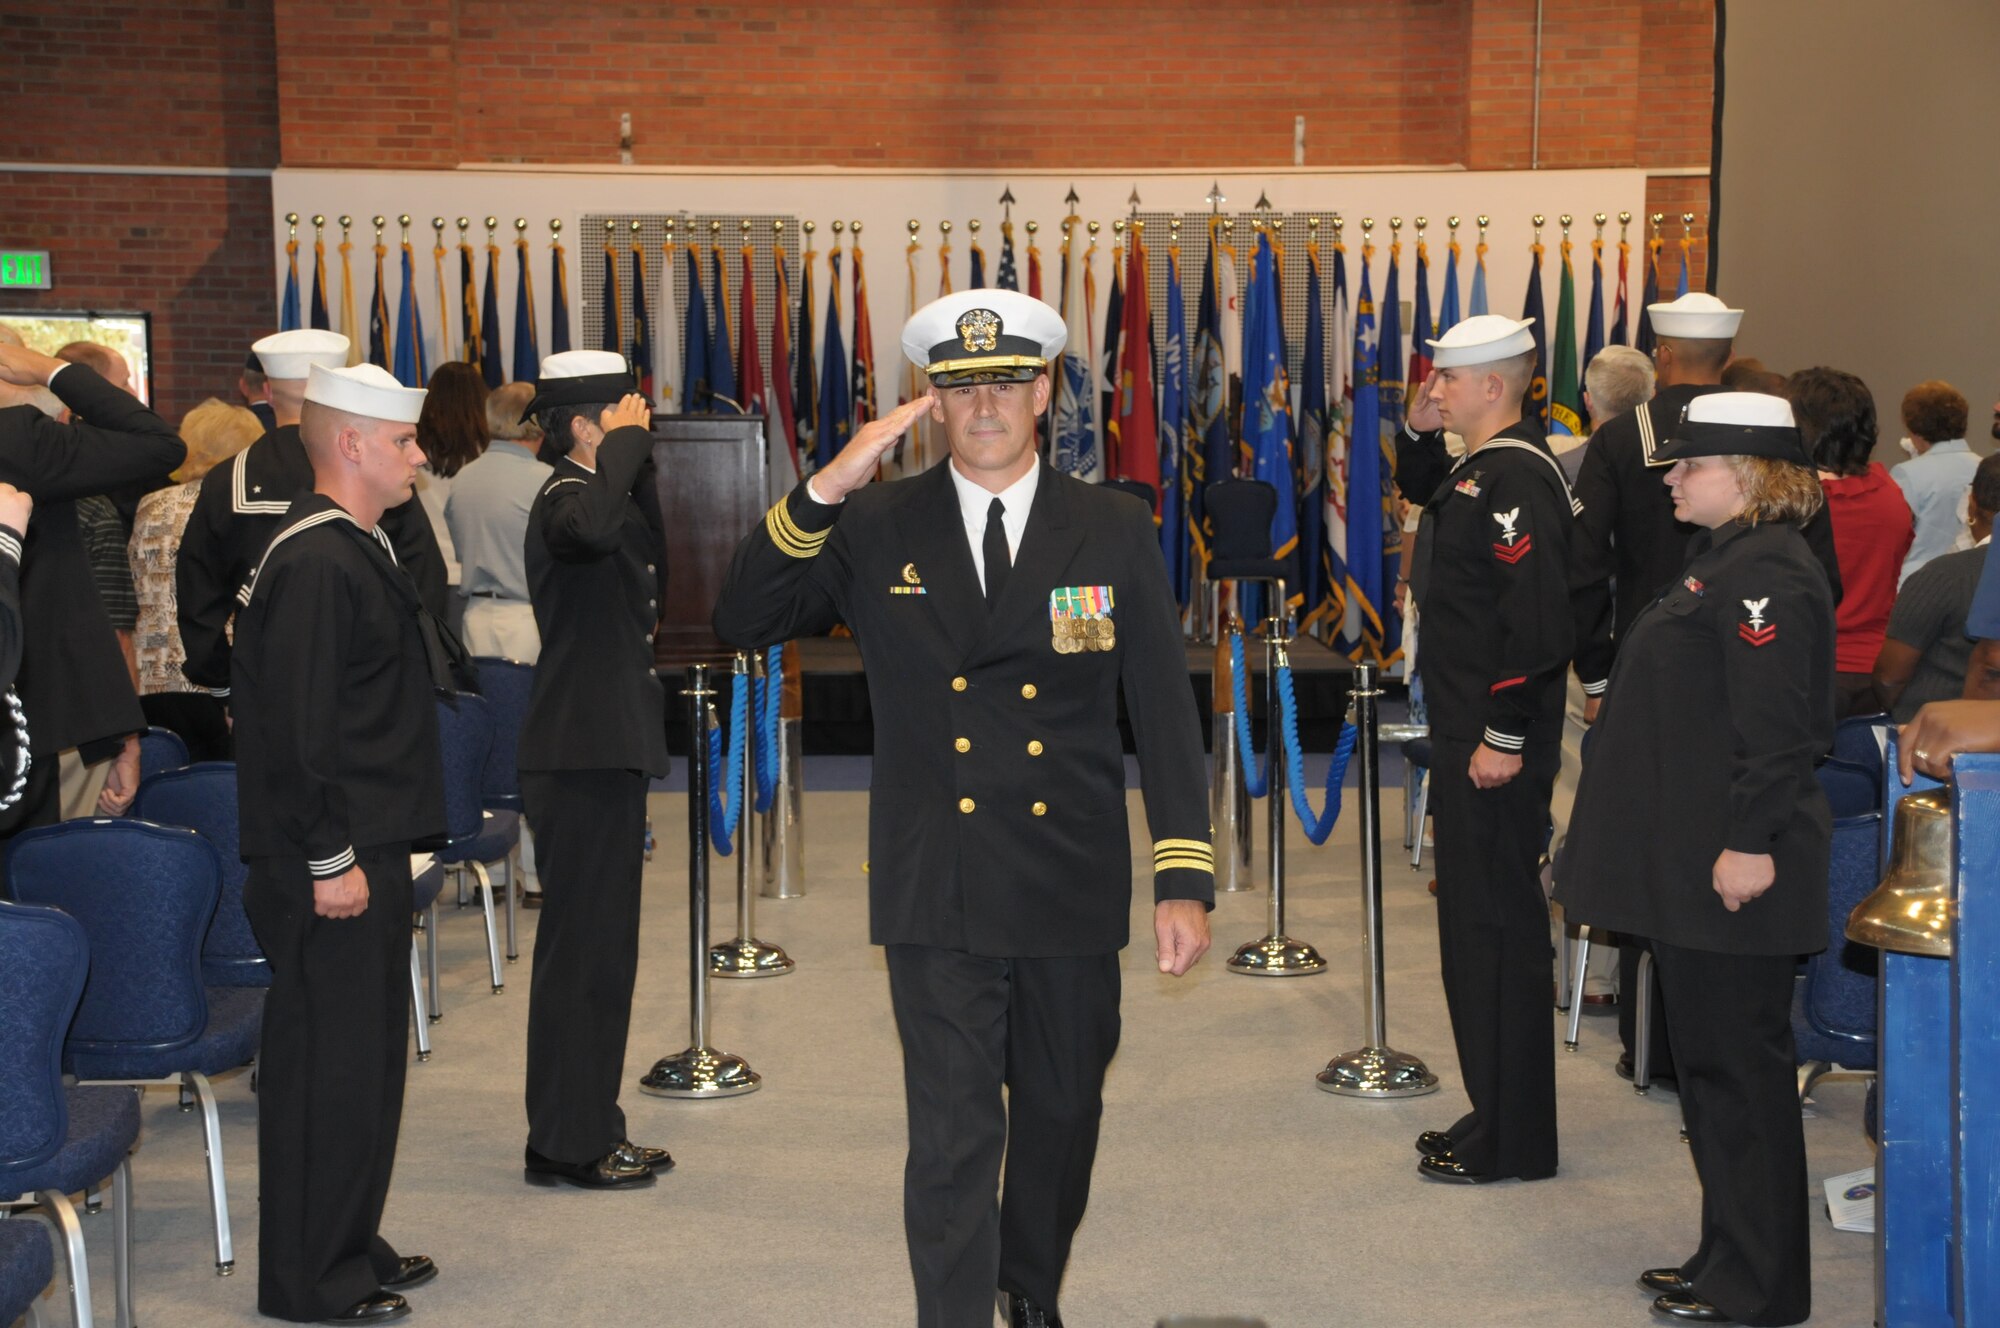 Lt. Cmdr. Chad “Coach” Tidwell, assuming commander of the Frontier Navy, salutes the side boys on the gangway during the change-of-command ceremony Sept. 10 in the Fall Hall Community Center here. (U.S. Air Force photo by Blaze Lipowski)